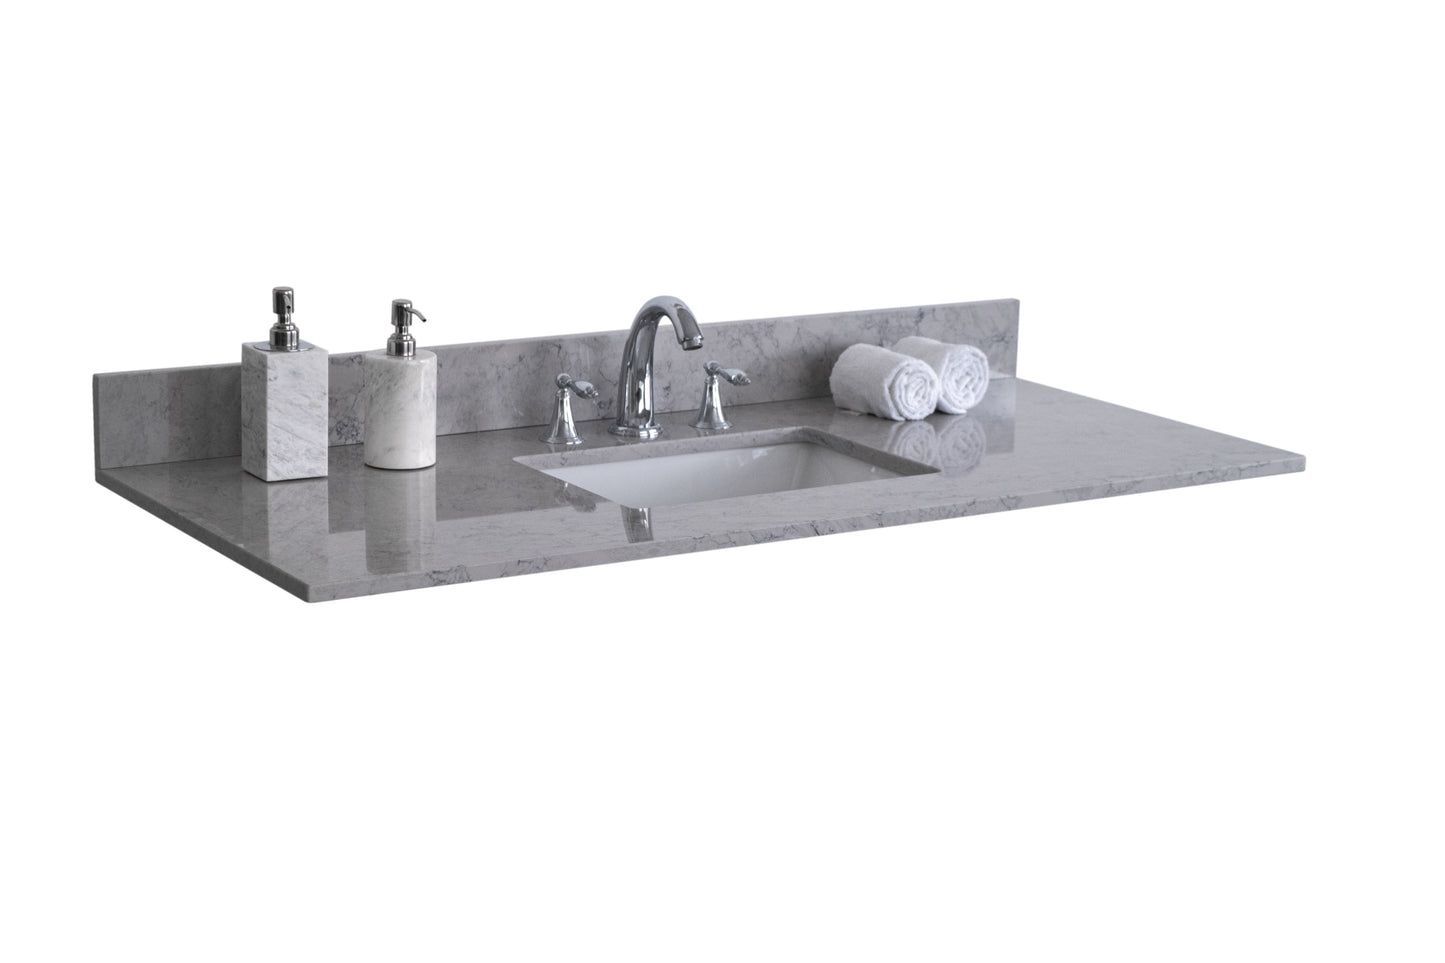 Montary 37 inches bathroom stone vanity top calacatta gray engineered marble color with undermount ceramic sink and 3 faucet hole with backsplash